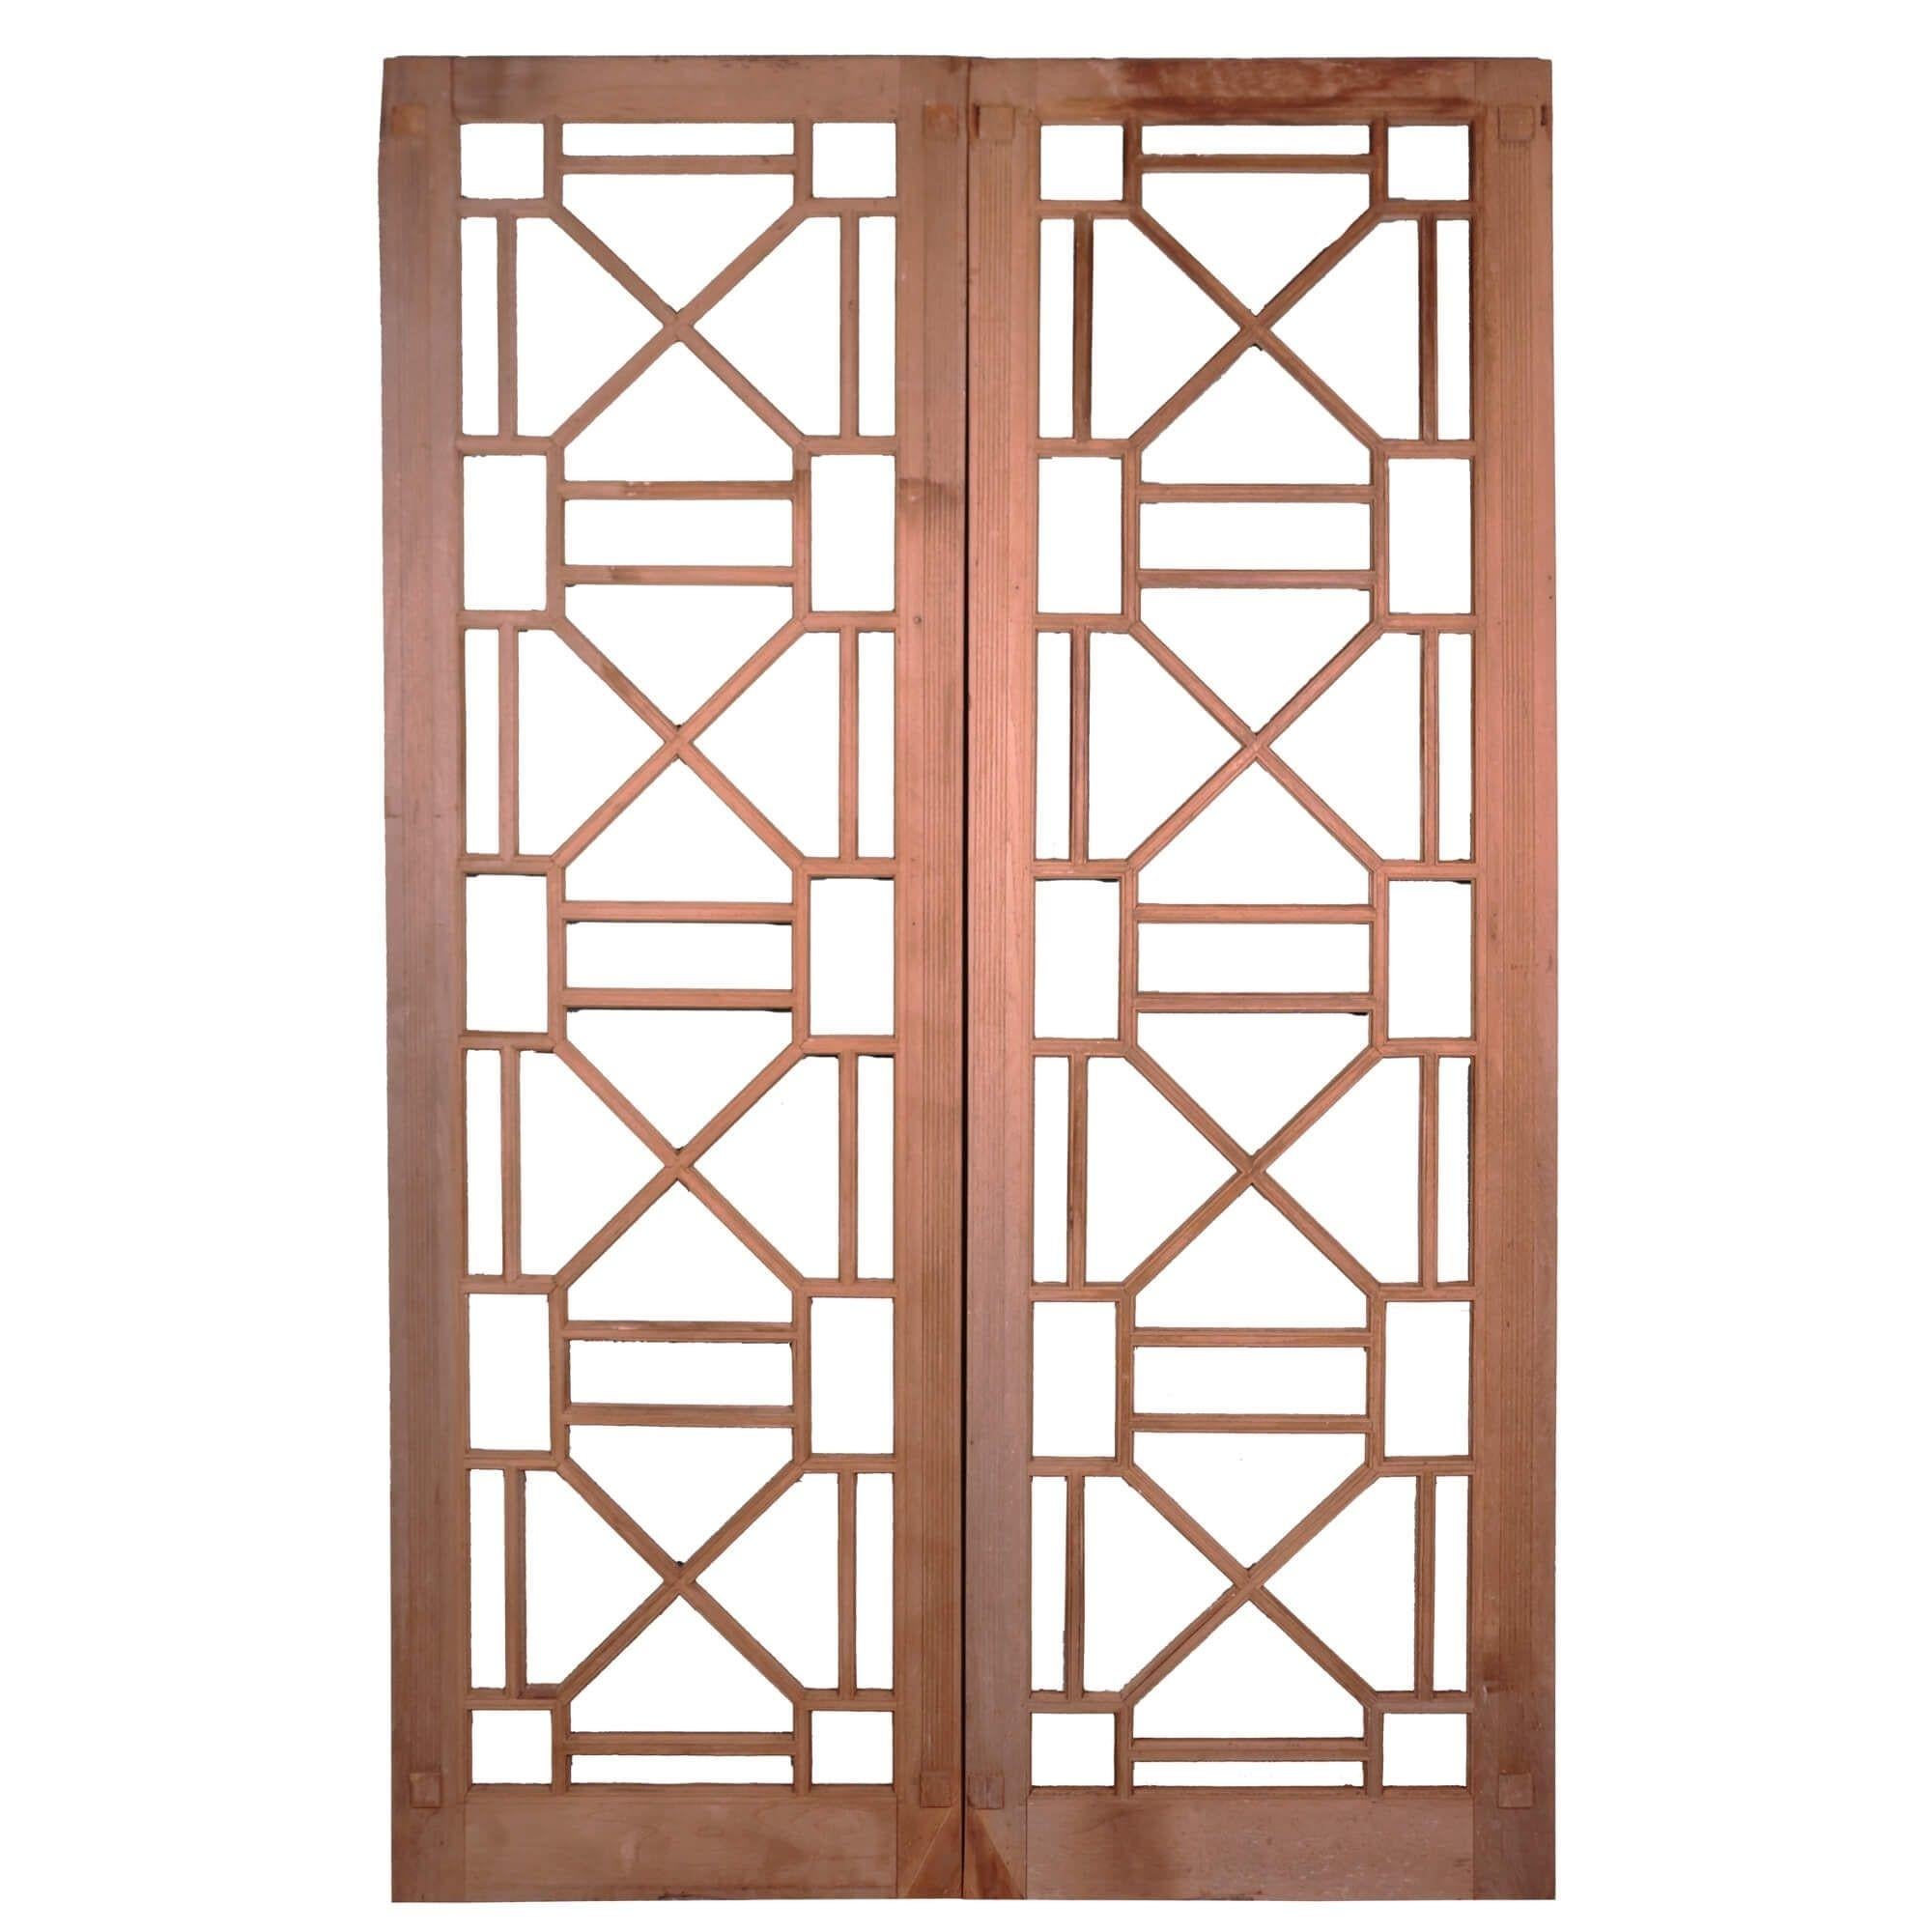 Large Art Deco Double Doors or Geometric Screen Panels For Sale